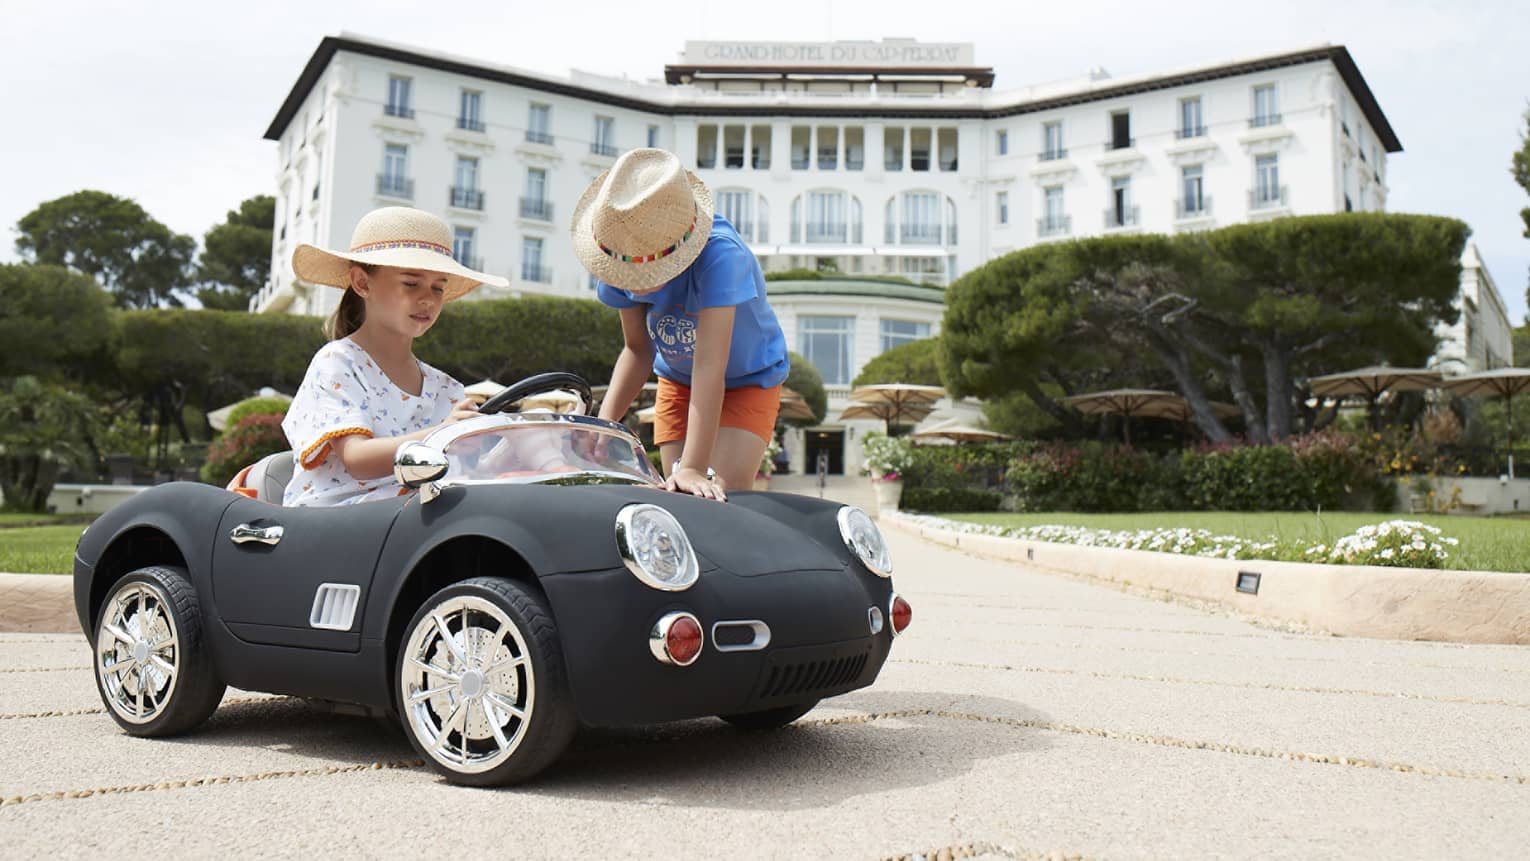 Girl wearing floral dress and straw hat driving black luxury mini convertible, boy in straw hat leaning over, hotel in backdrop